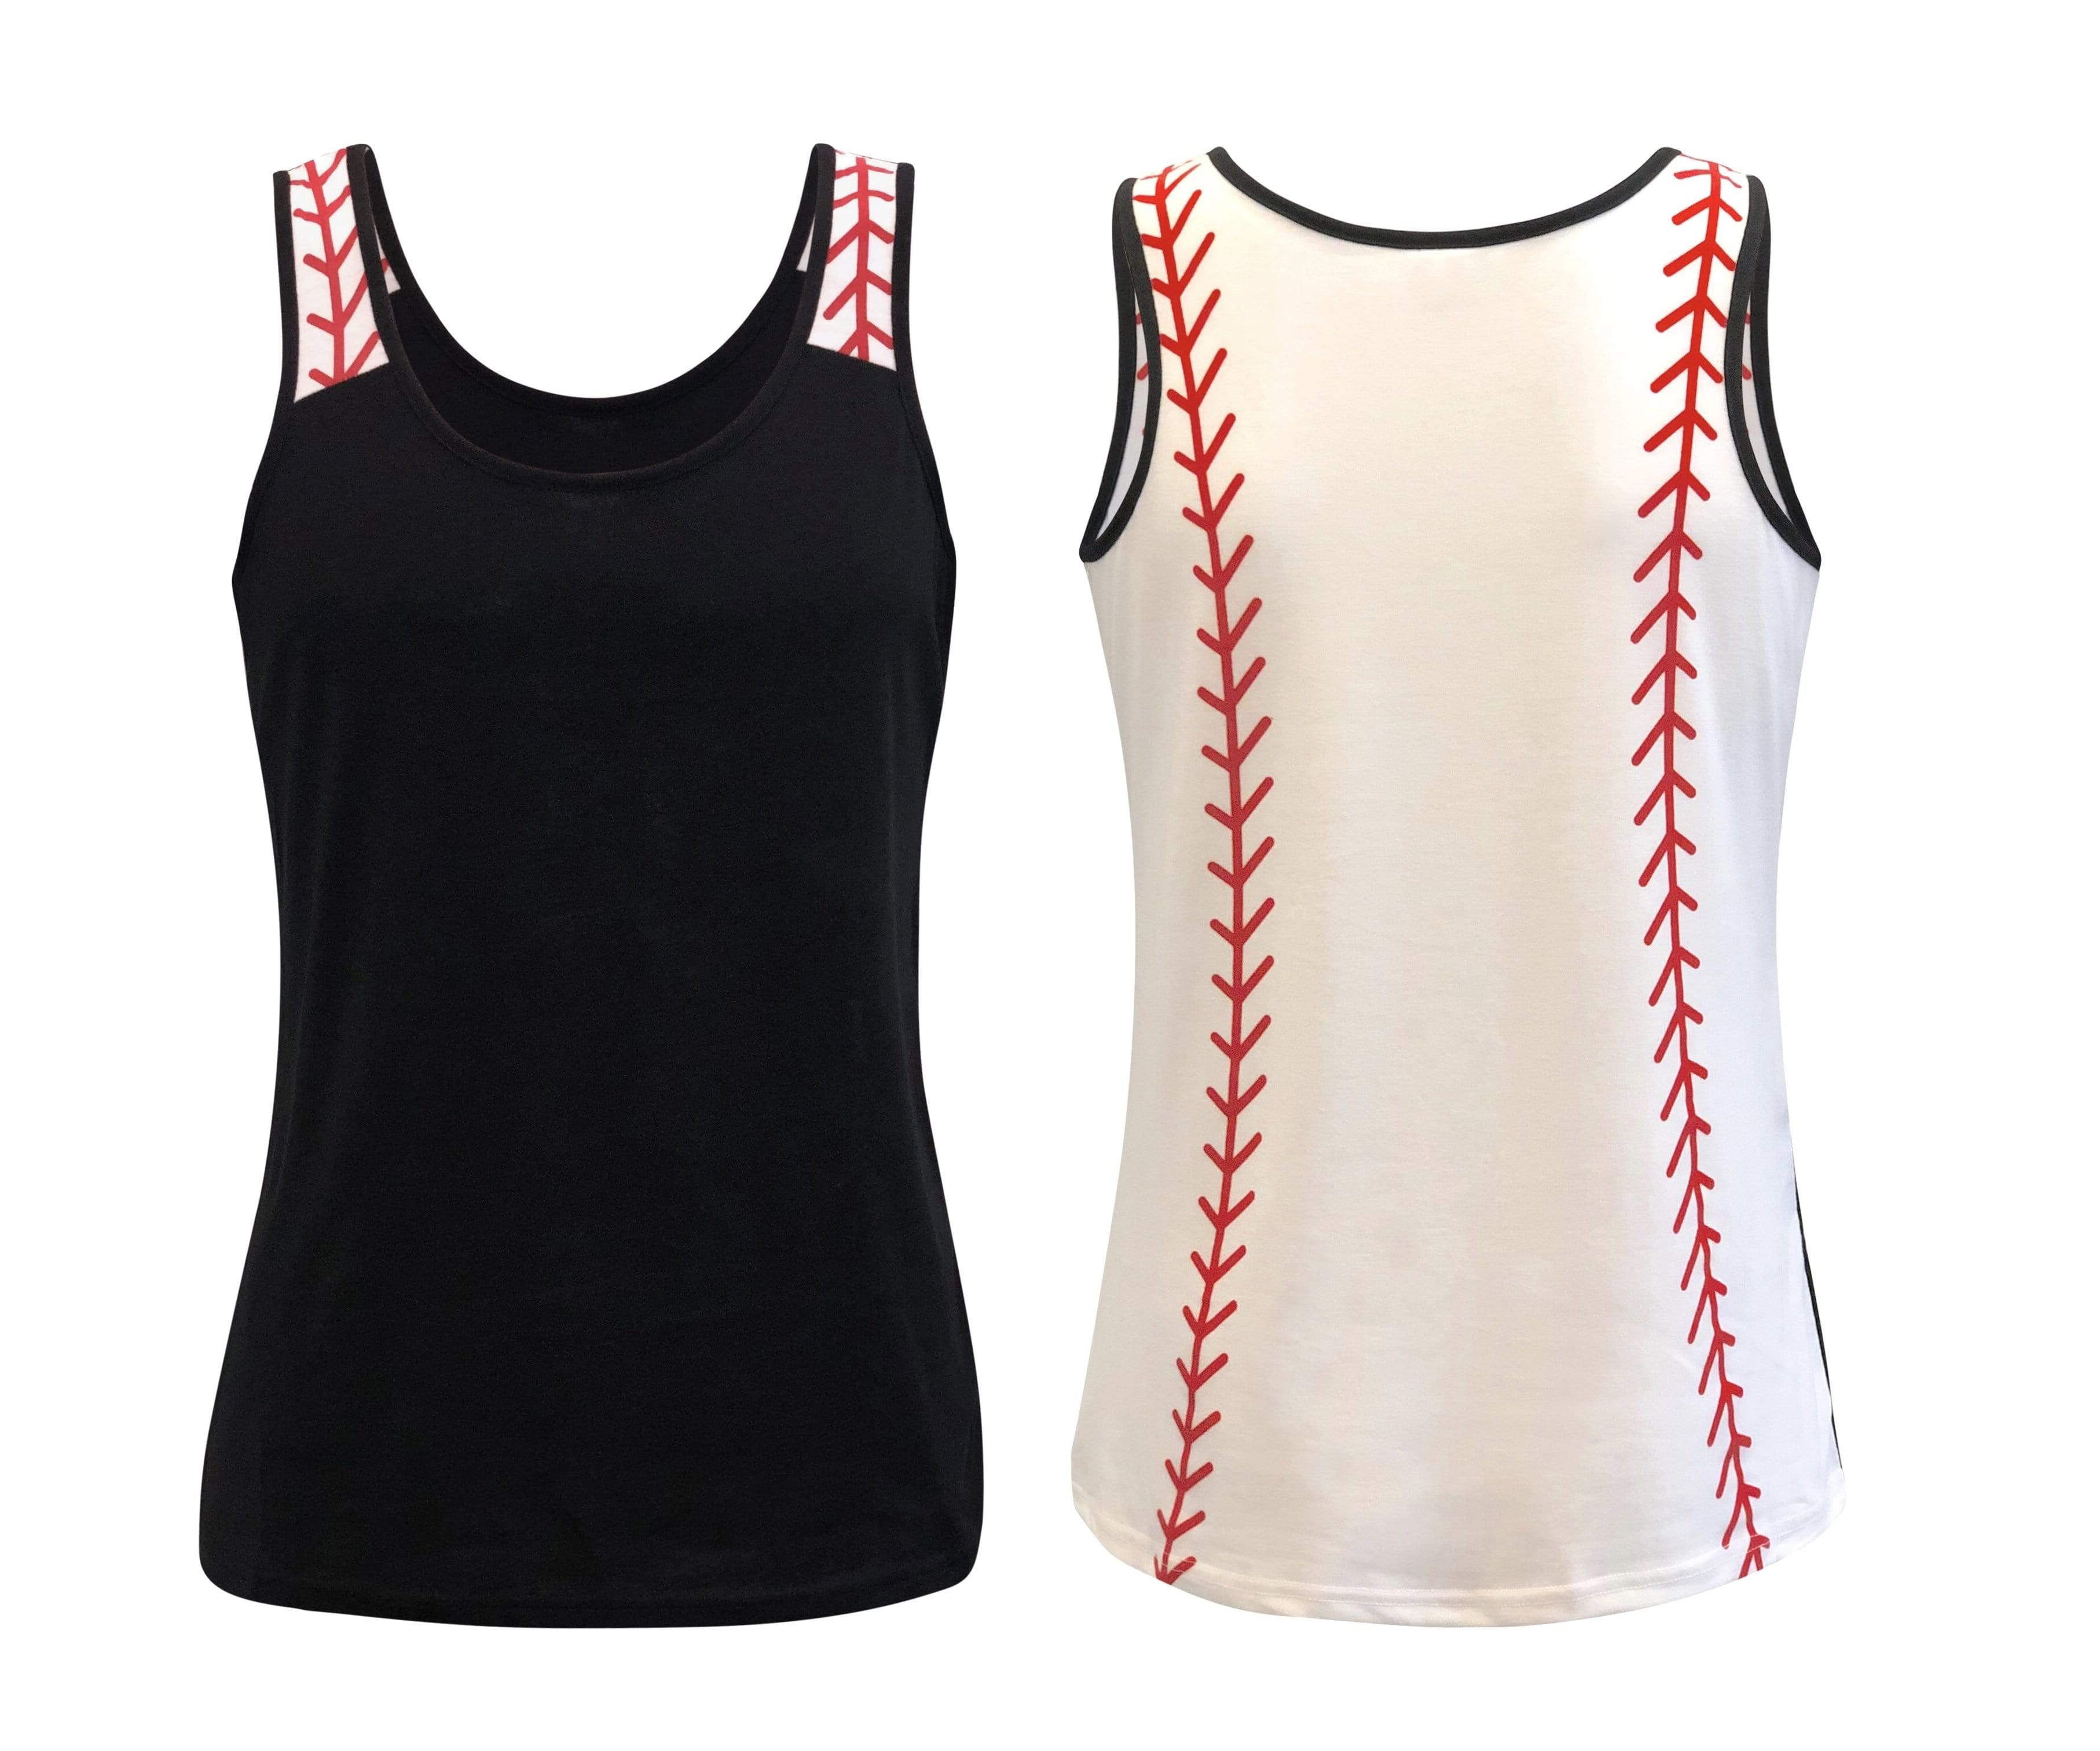 Polyester Camisoles - Buy Polyester Camisoles online in India